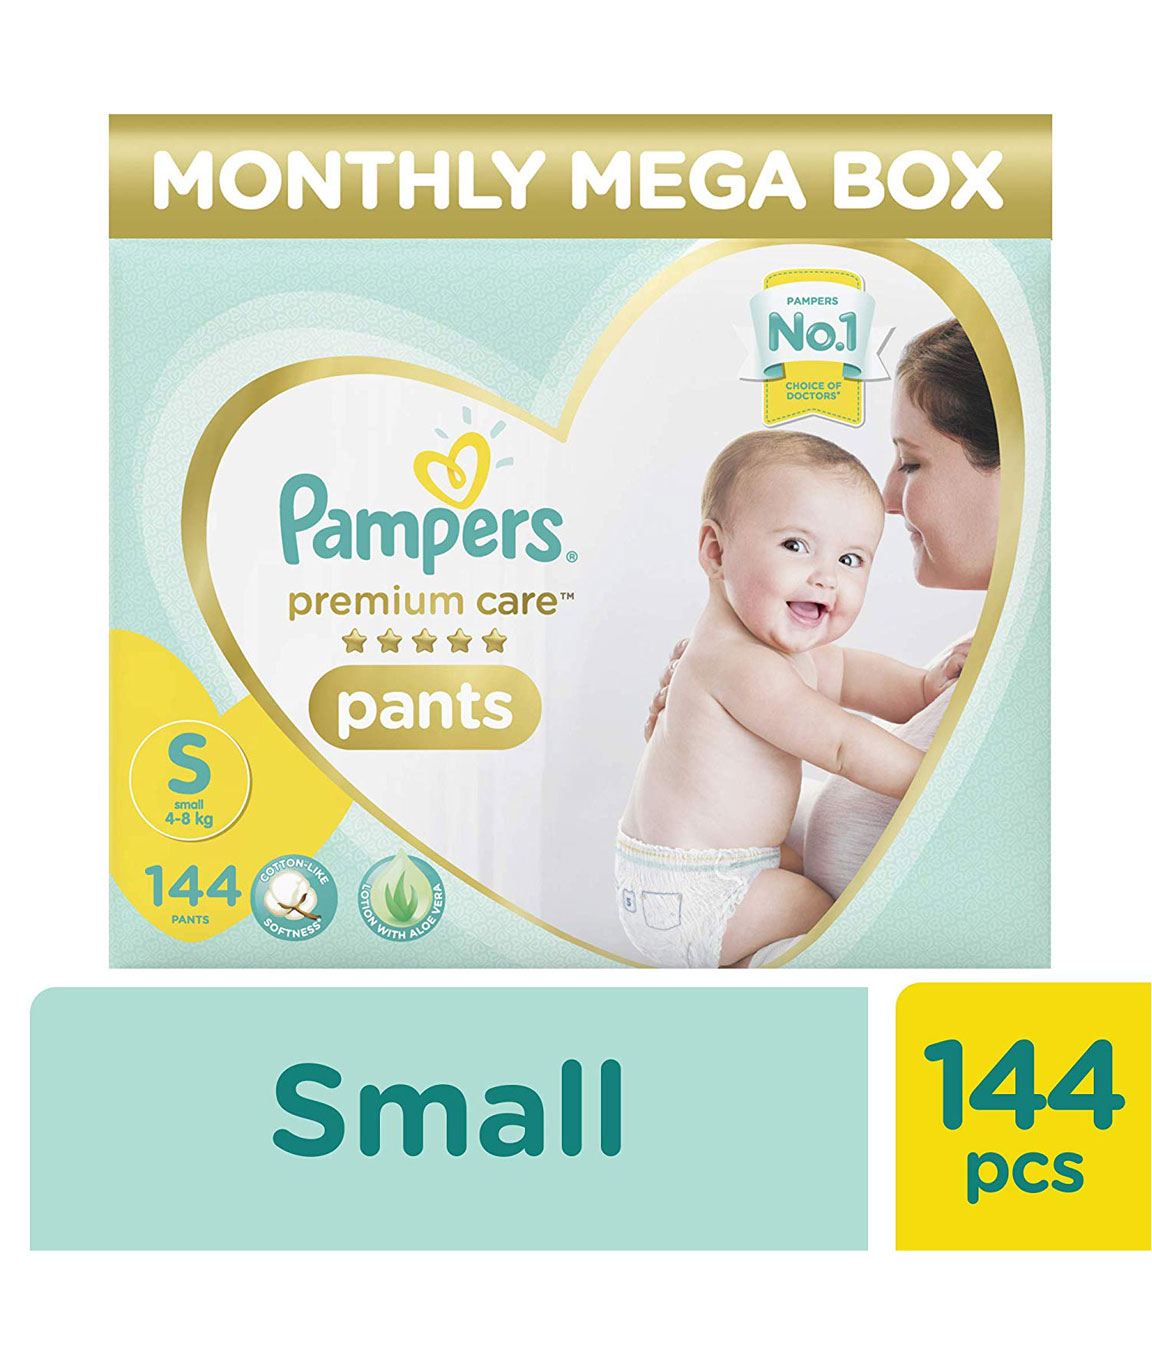 Buy Pampers Premium Care Pants, New Born/Extra Small (NB/XS) Size, 70  Count, Pant Style Baby Diapers, All-in-1 Diapers with 360 Cottony Softness,  Up to 5kg Diapers Online at Low Prices in India -